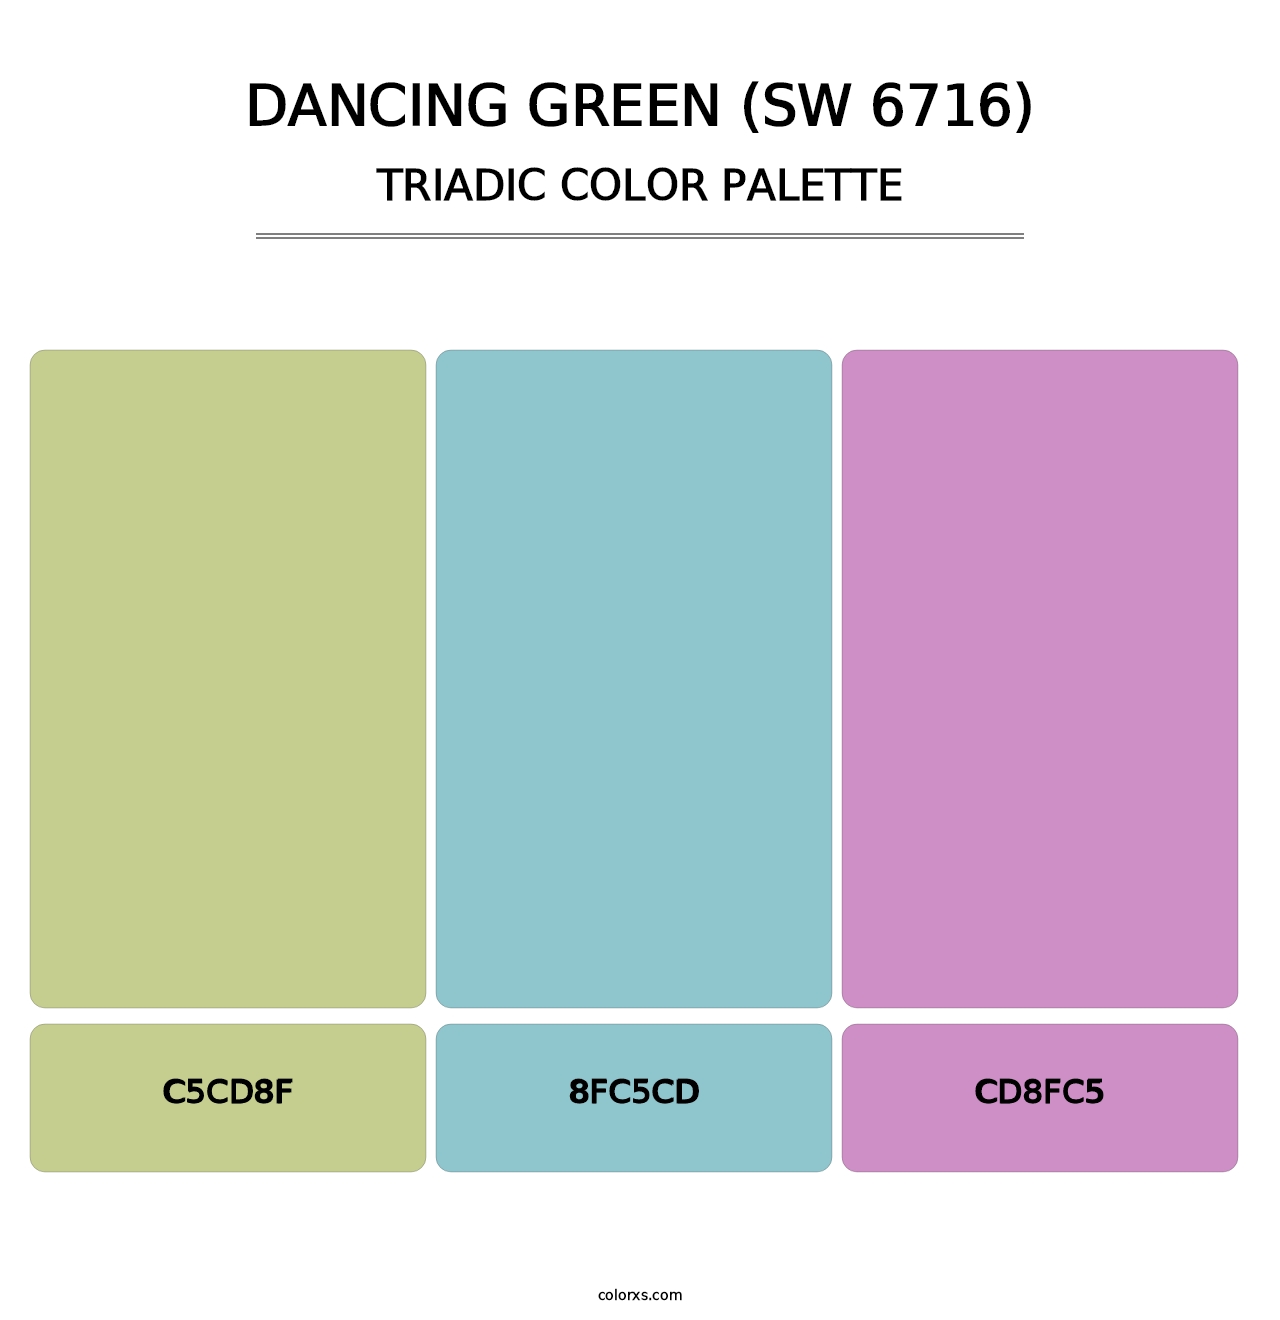 Dancing Green (SW 6716) - Triadic Color Palette